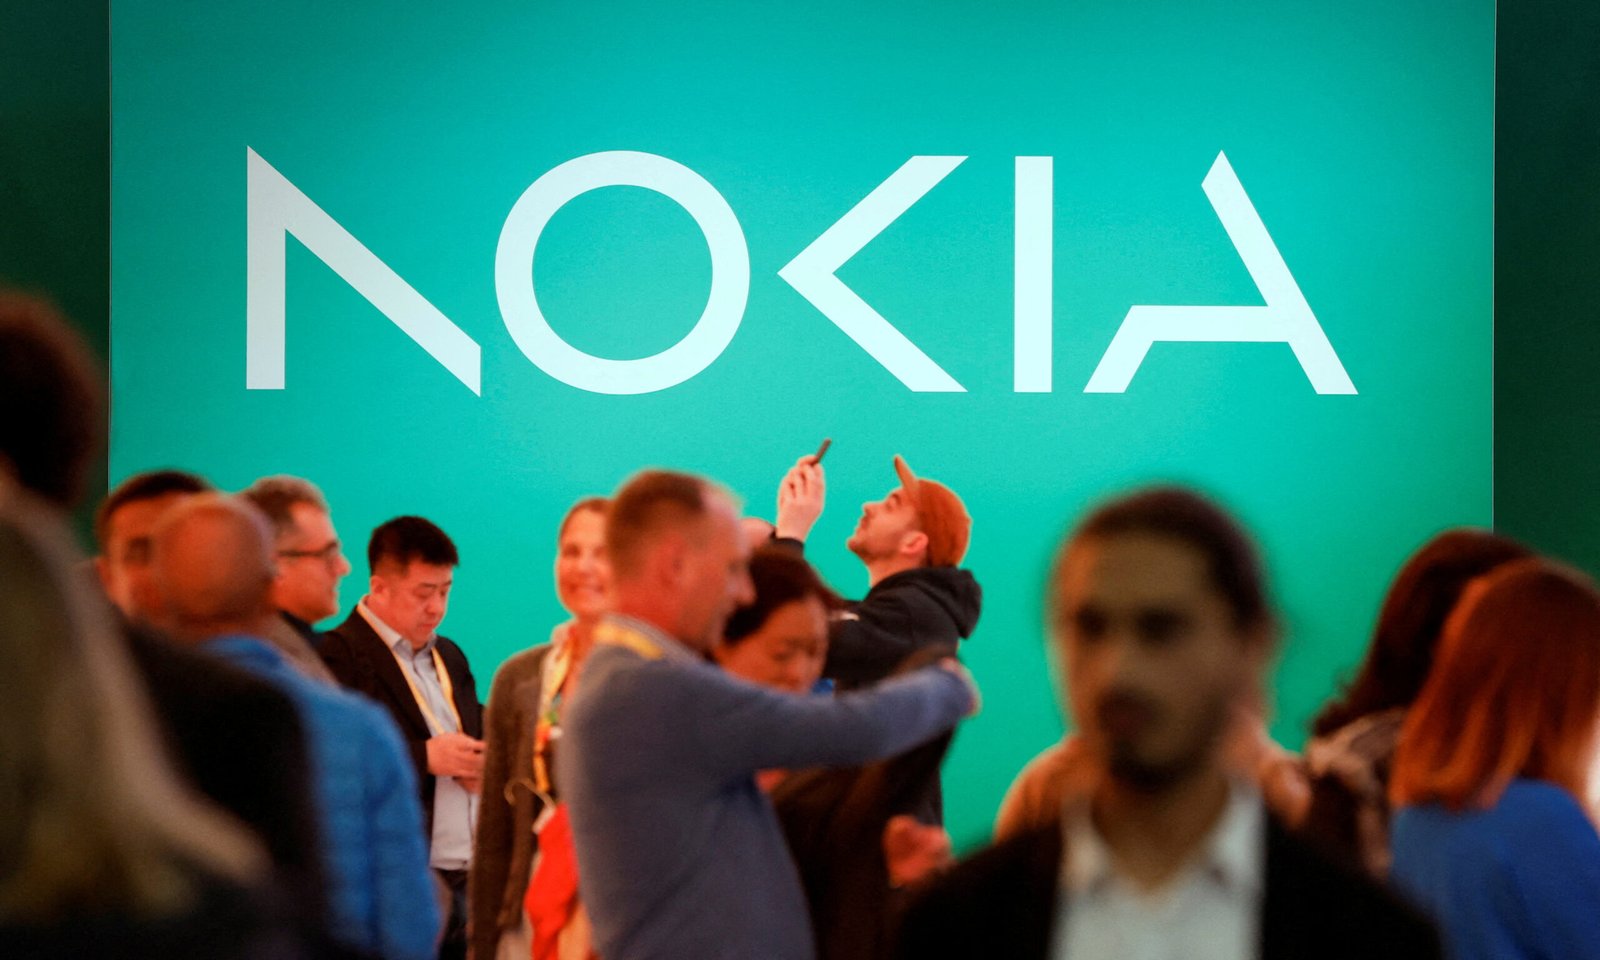 Nokia plans to cut massive jobs to lower costs